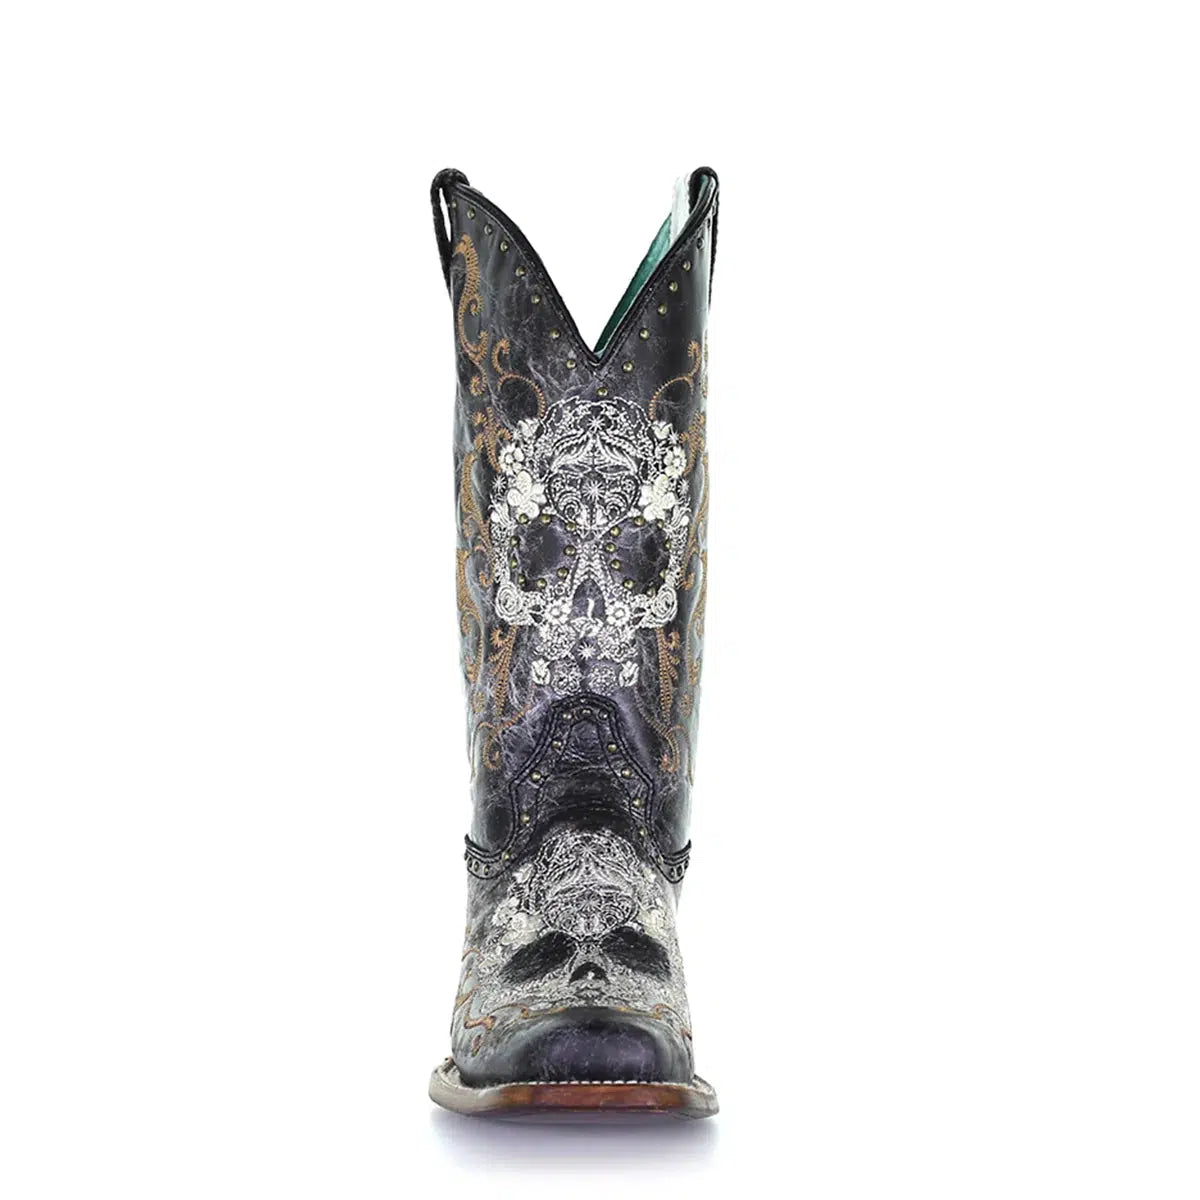 Z5005 - Corral black skull western cowgirl leather boots for women-Kuet.us